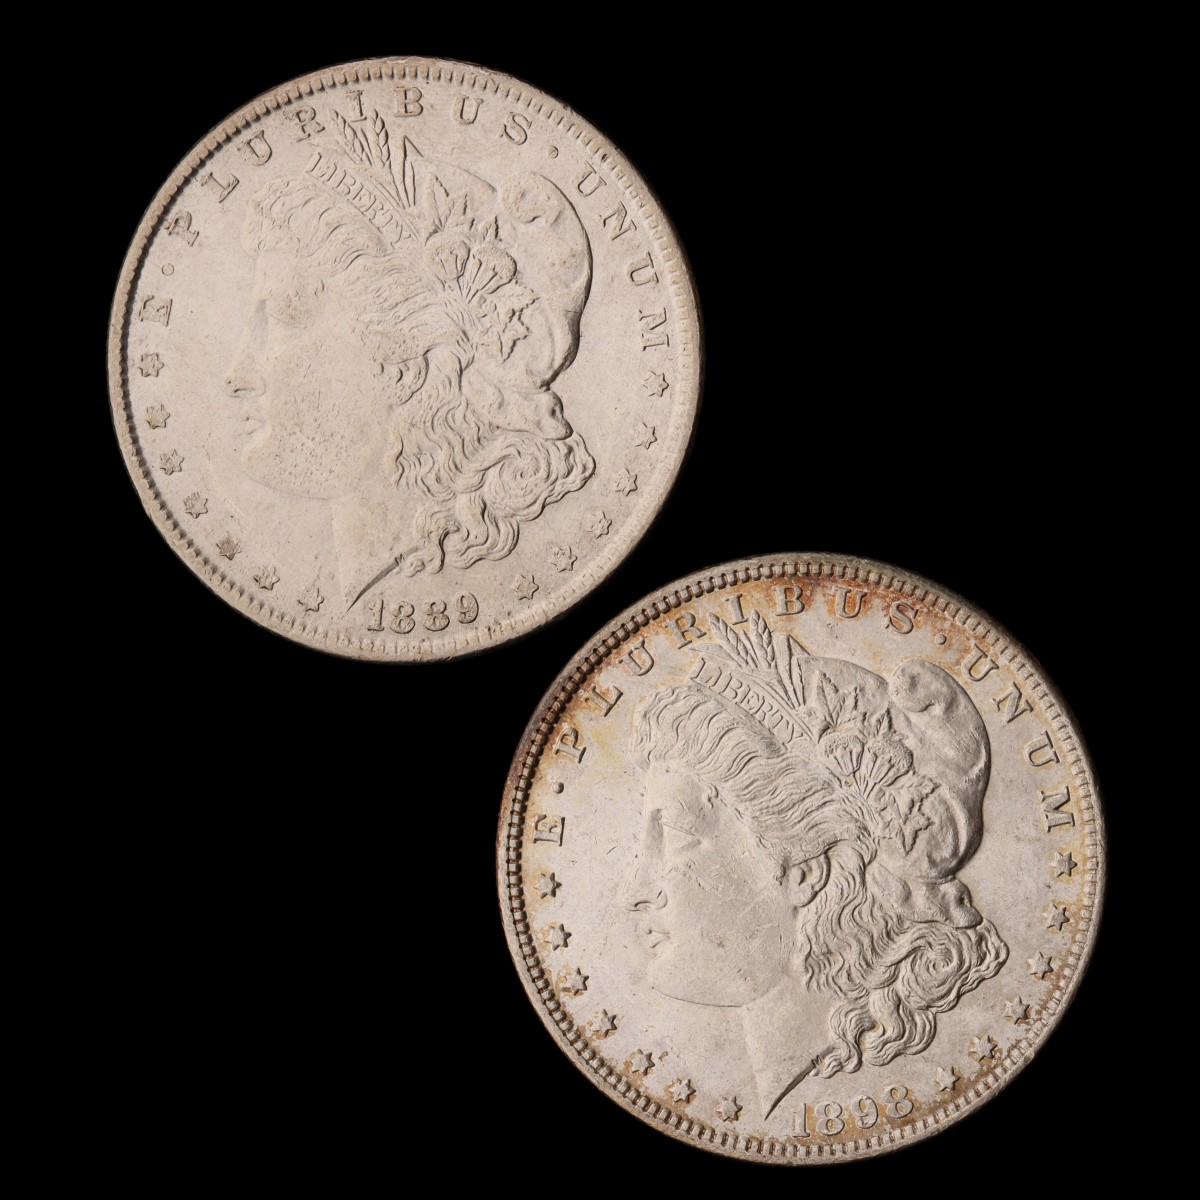 TWO HIGHER GRADE MORGAN SILVER DOLLARS, 1889 AND 1898